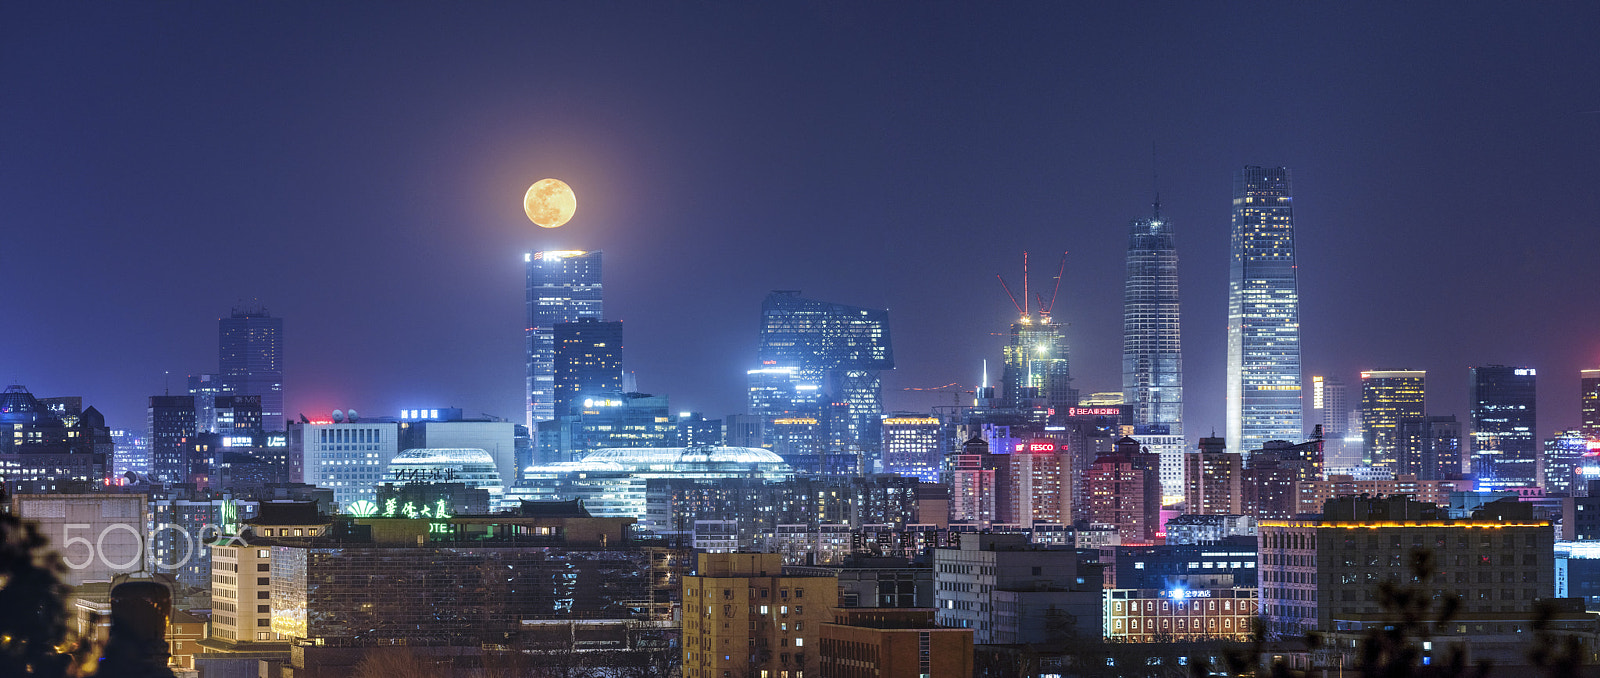 Pentax 645Z sample photo. Cbd of beijing with the full moon photography